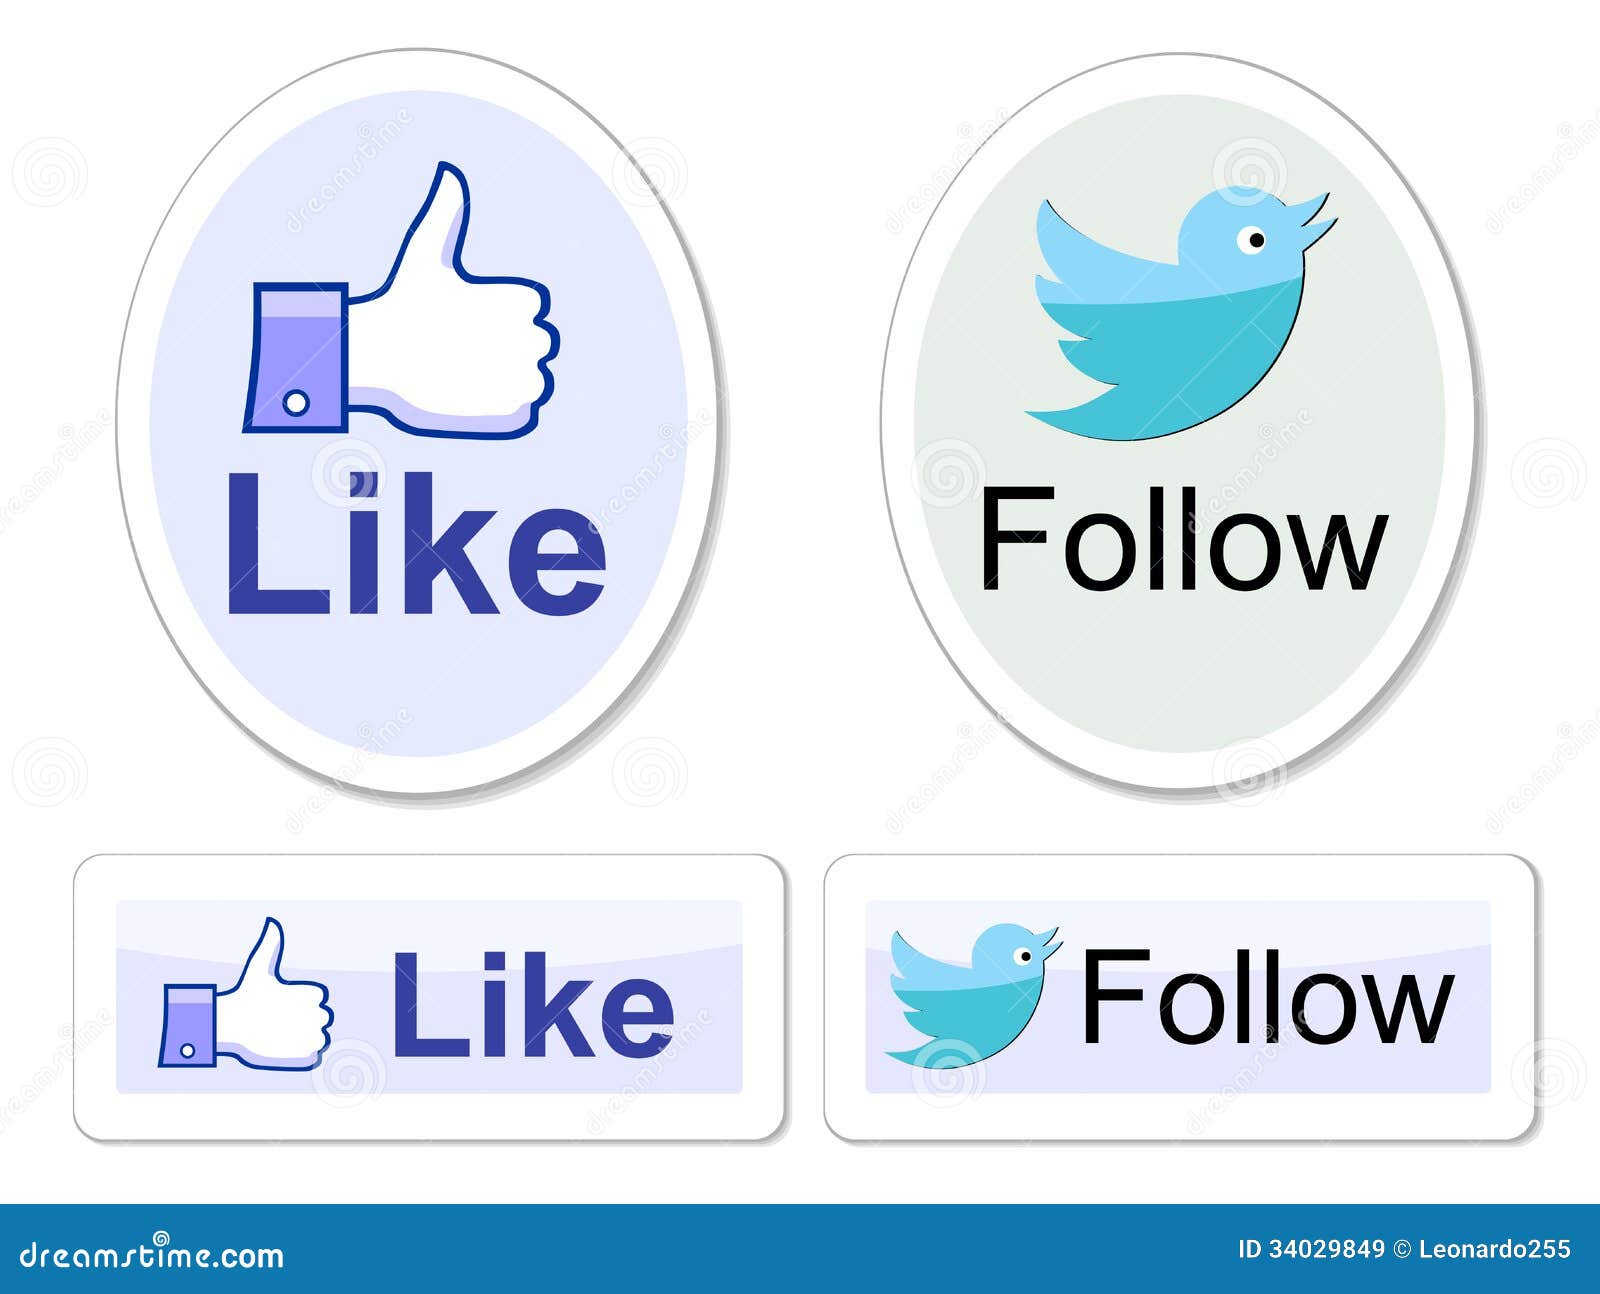 Facebook And Twitter Like It Buttons Editorial Stock Image - Image: 340298491300 x 1068